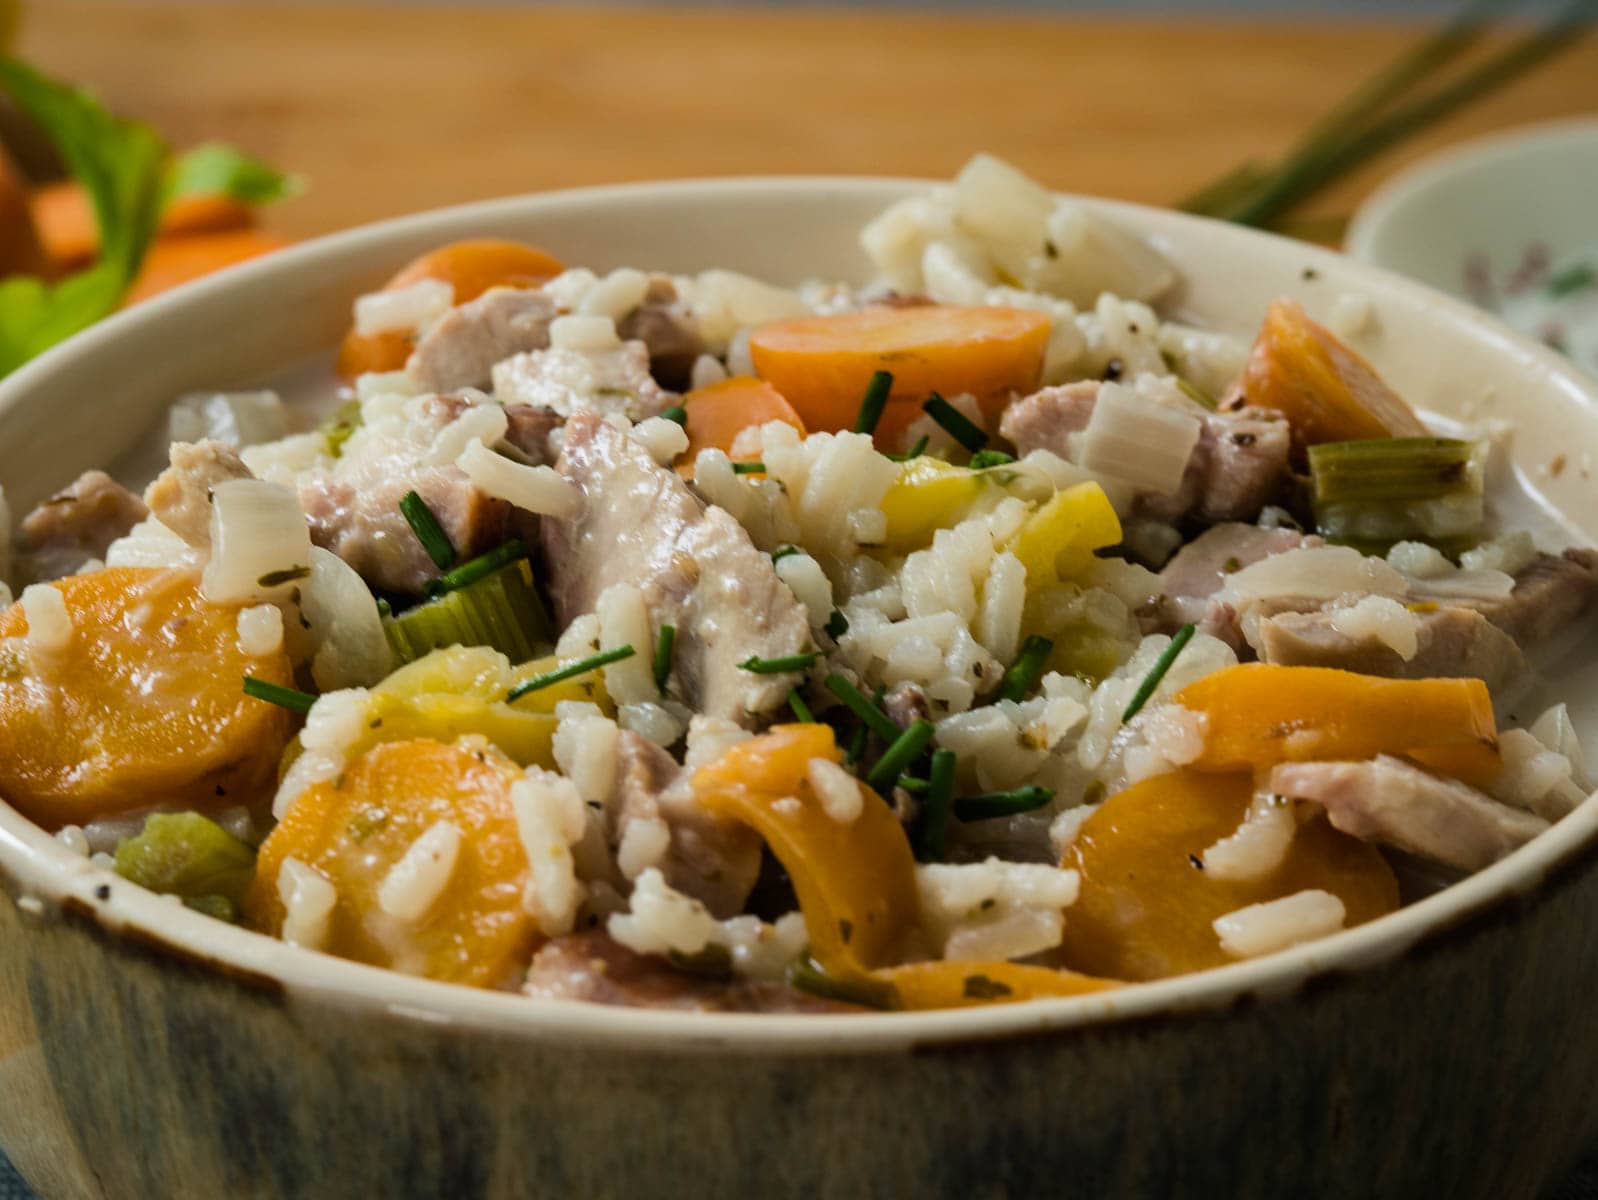 Bowl of turkey soup with rice and carrots.